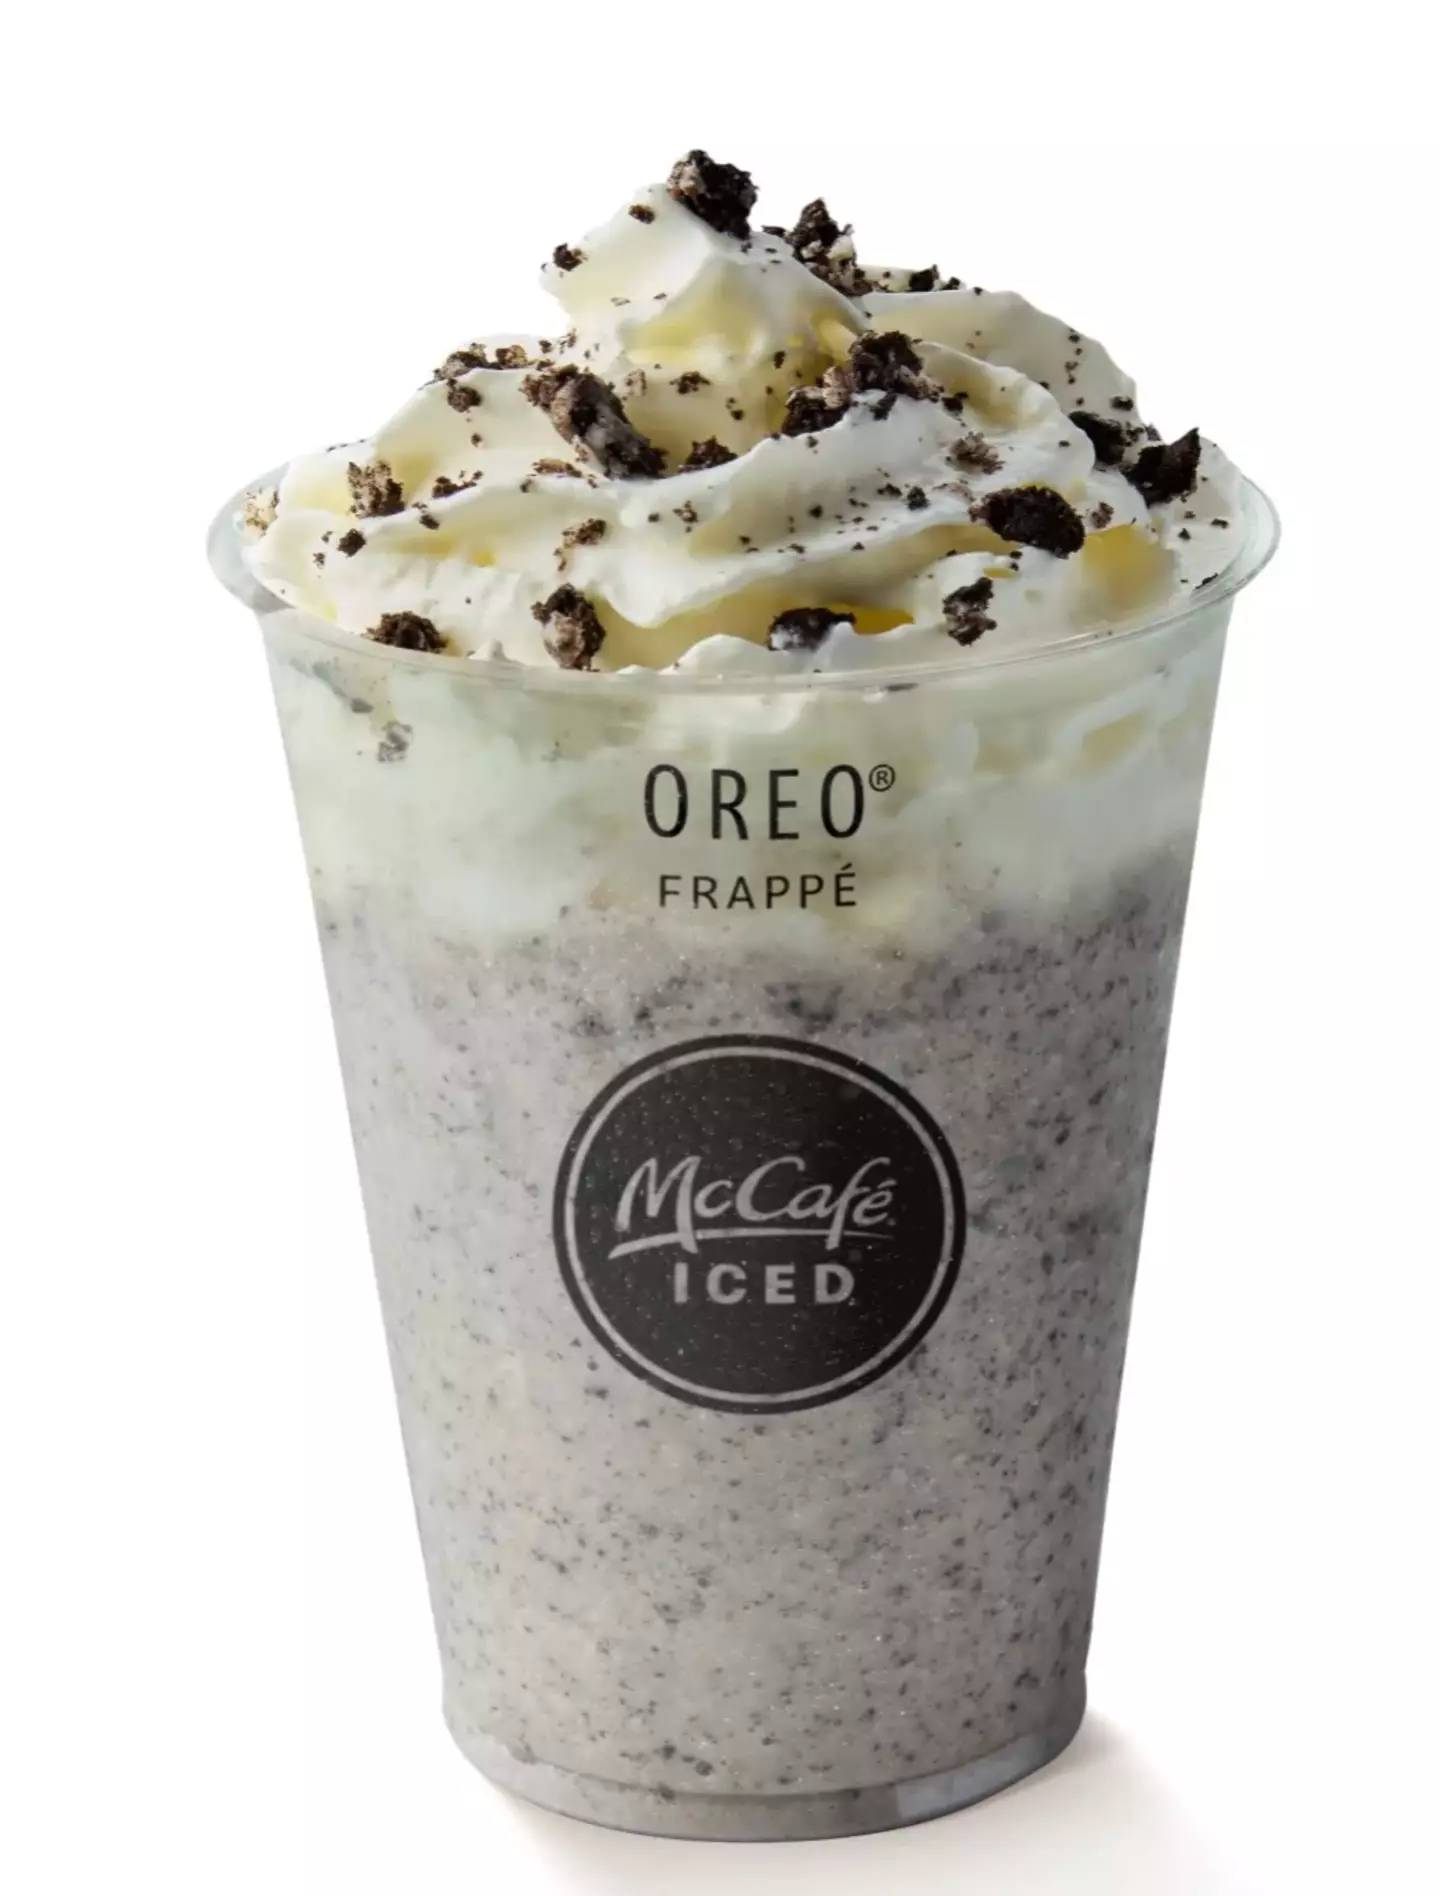 The Oreo Frappé has replaced a fan-favourite. (McDonald's)